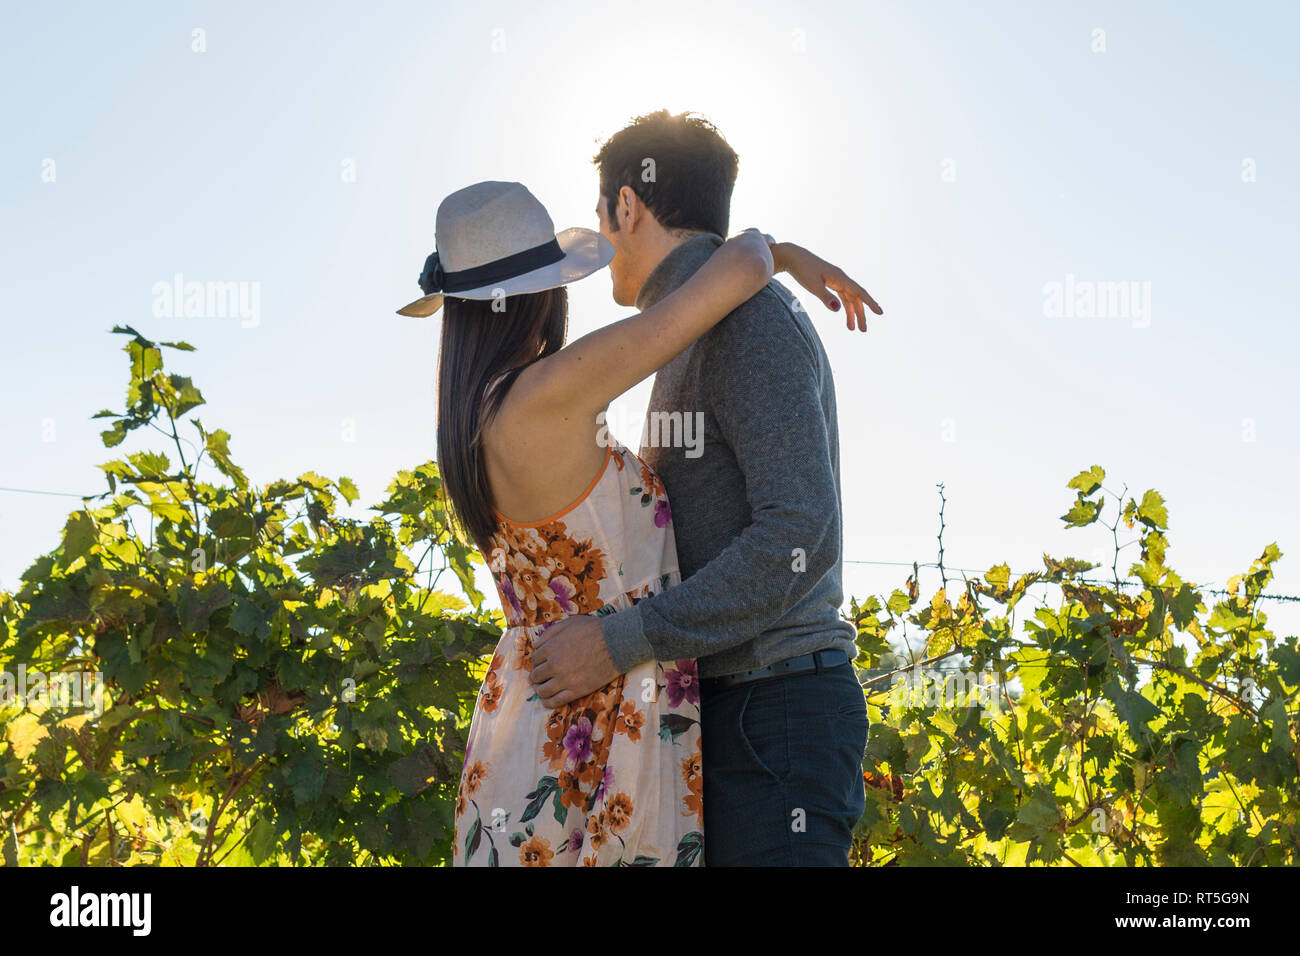 Italy, Tuscany, Siena, young couple embracing in a vineyard Stock Photo